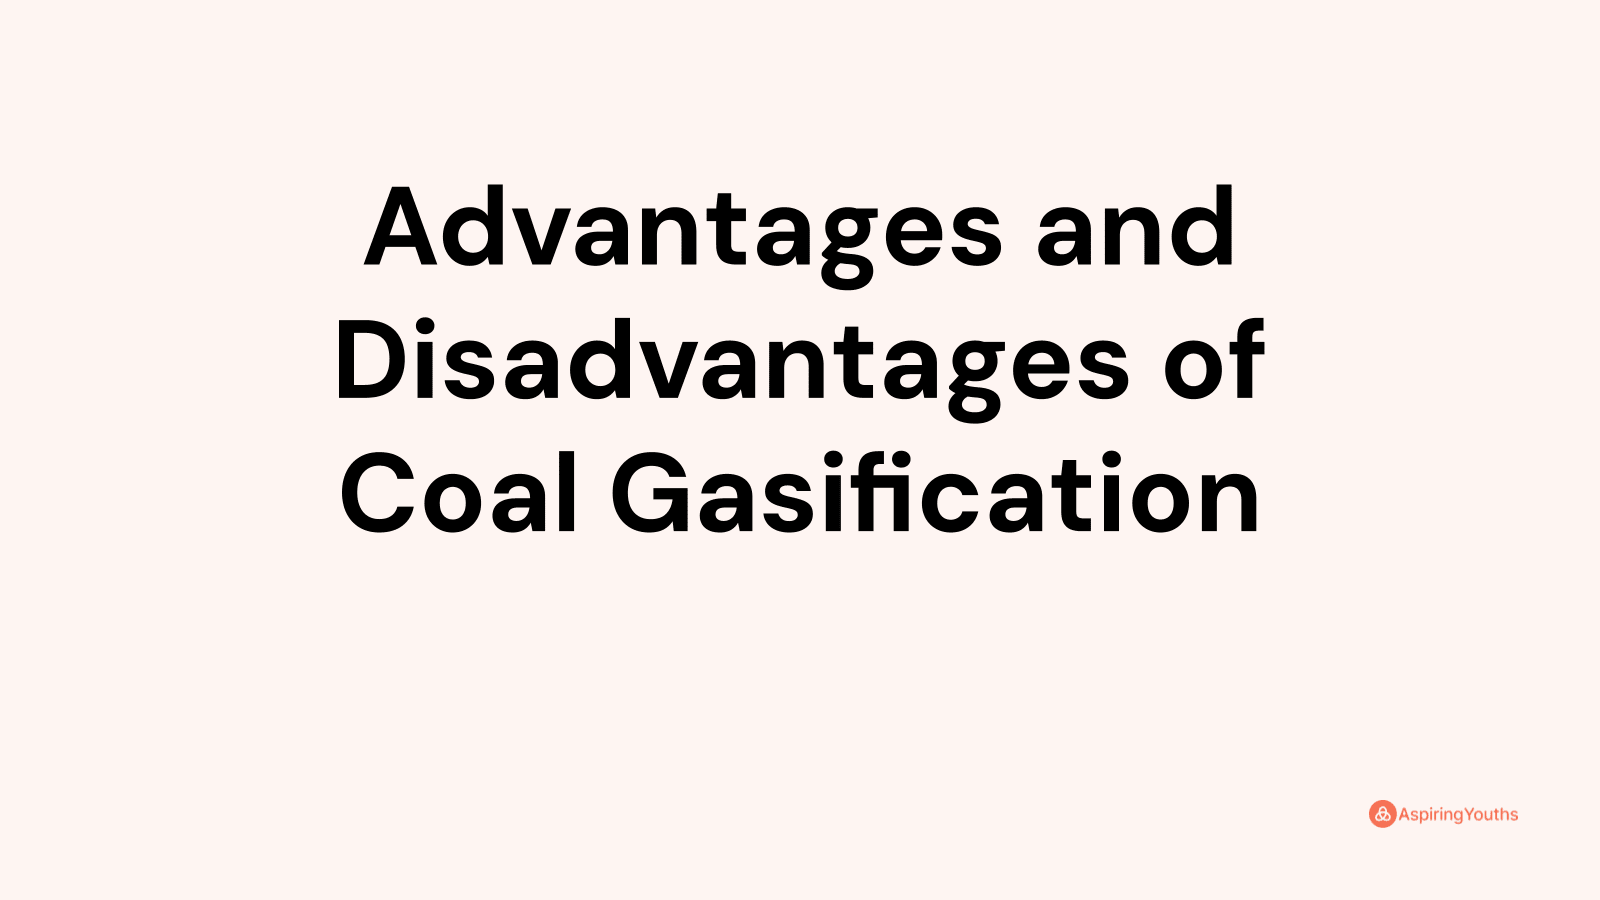 Advantages and disadvantages of Coal Gasification